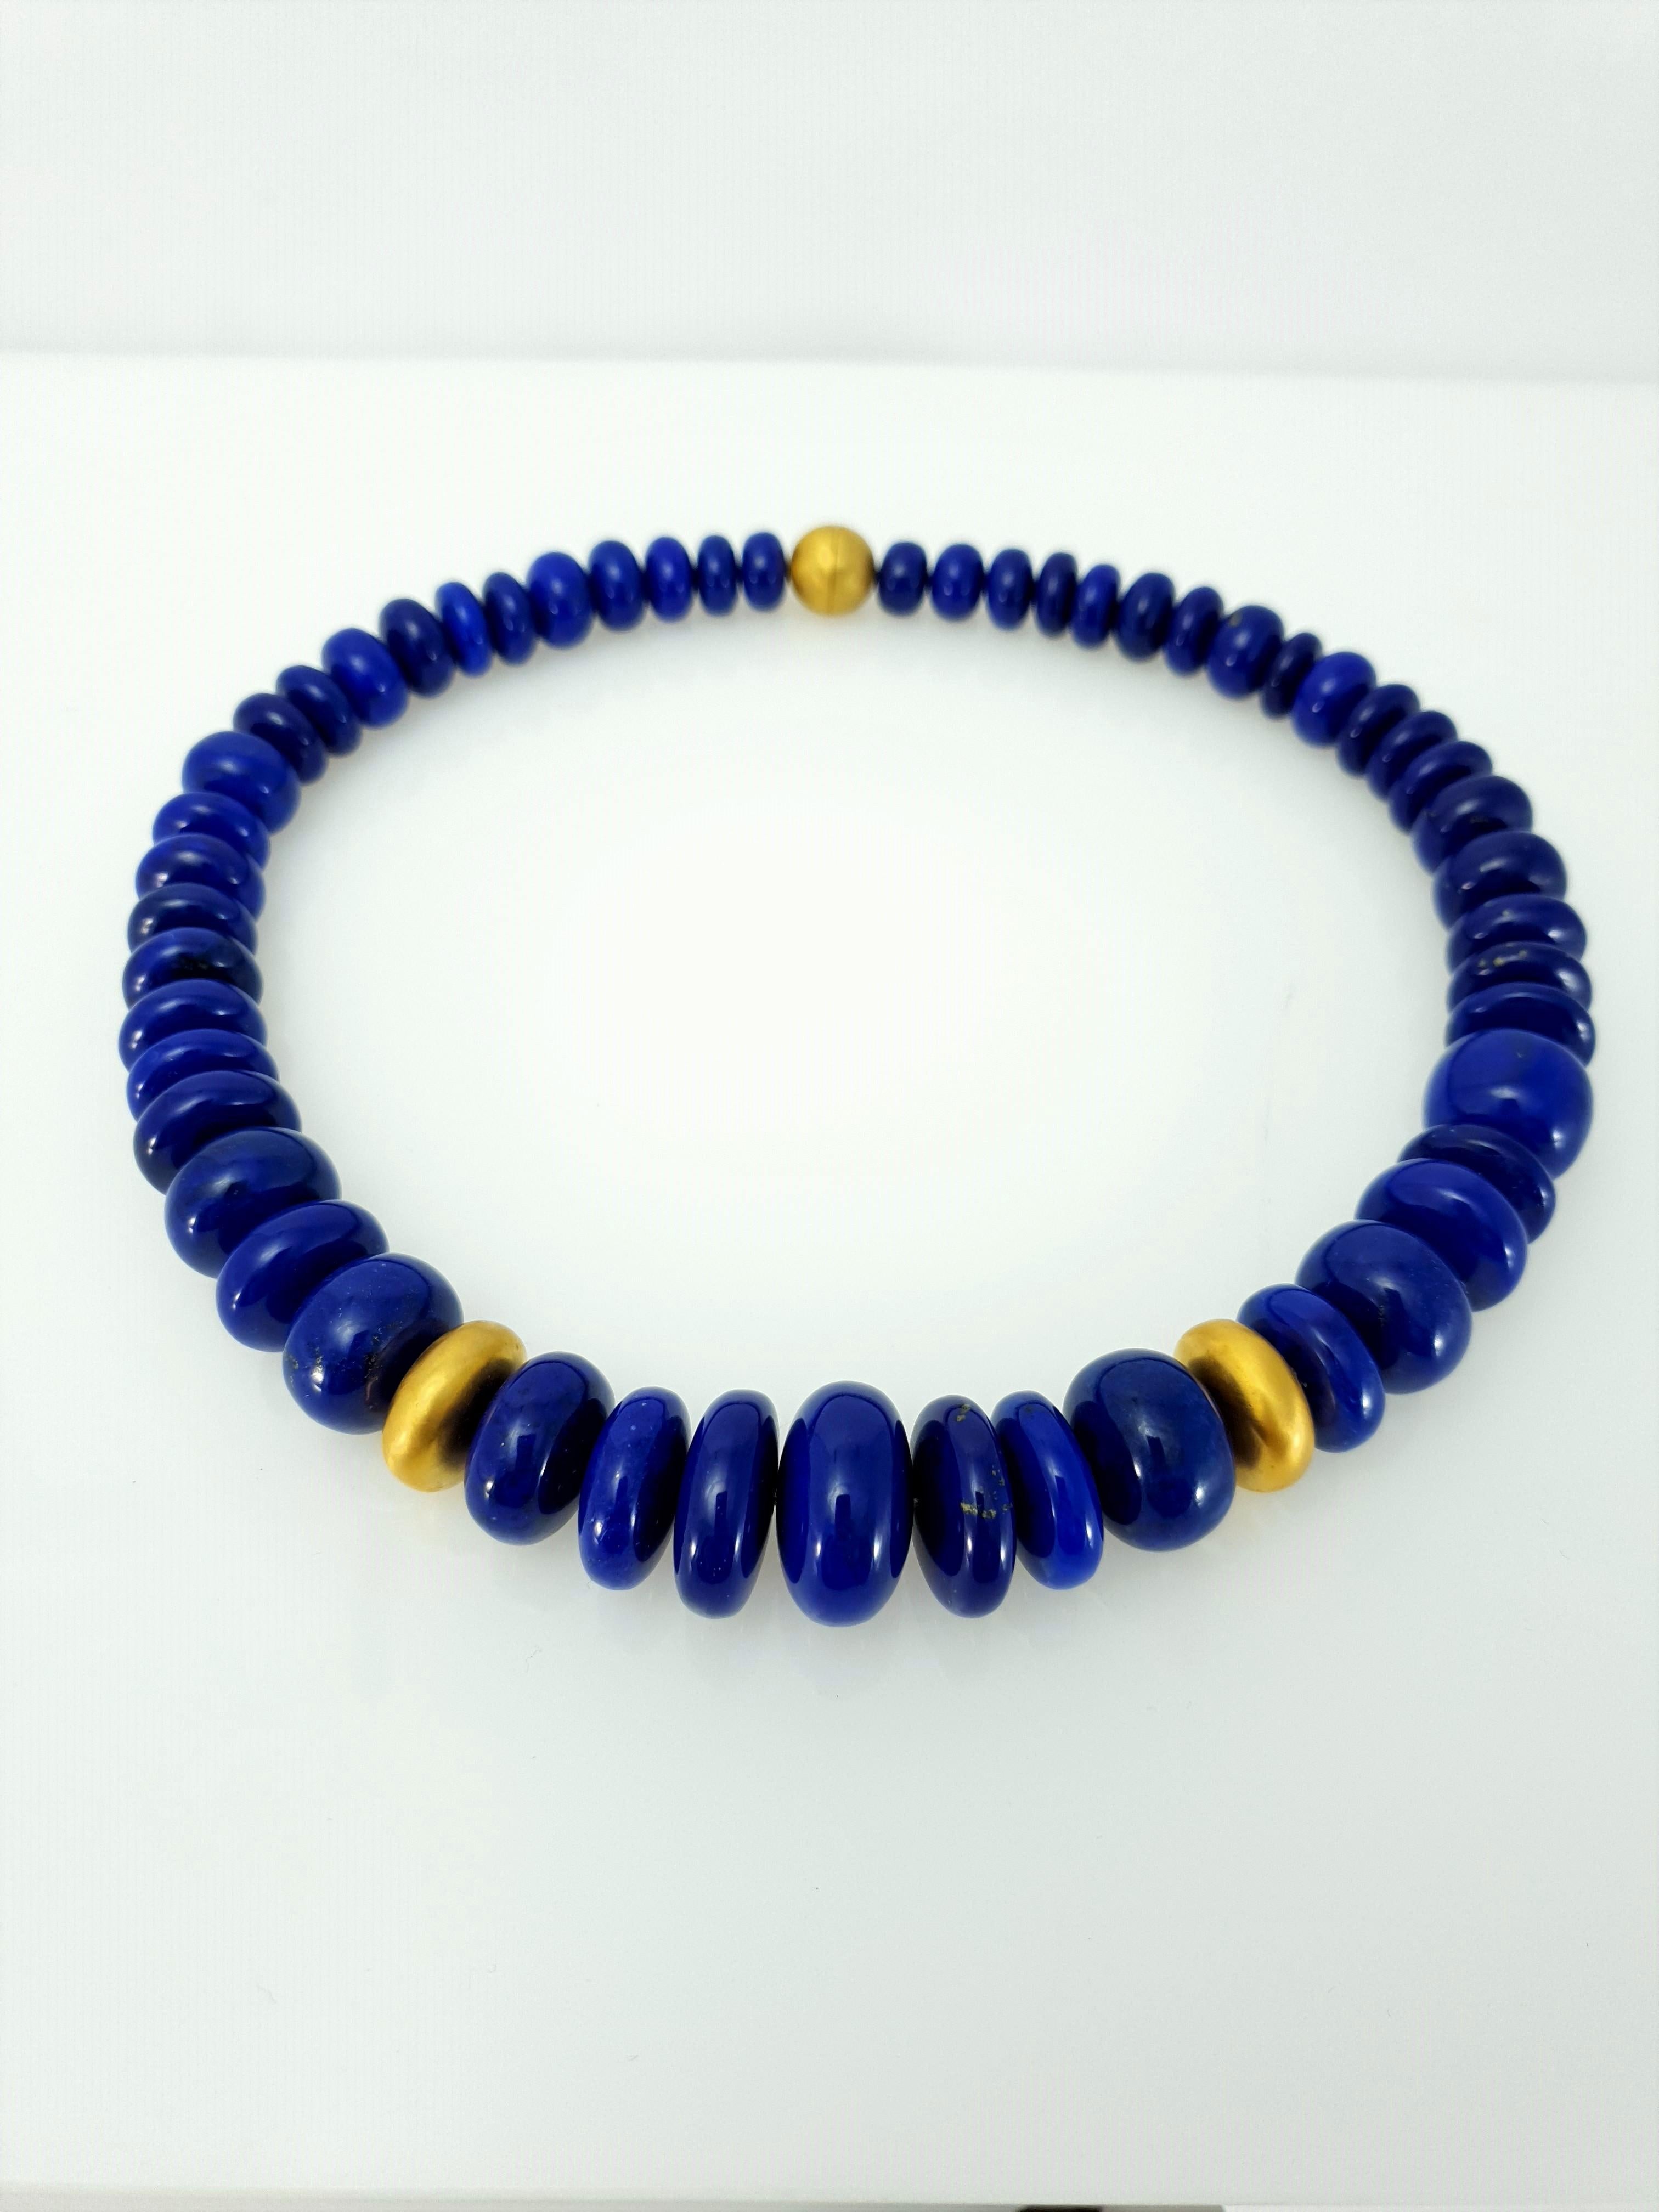 Royal Blue Lapis Lazuli Rondel Beaded Necklace with 18 Carat Mat Yellow Gold For Sale 6